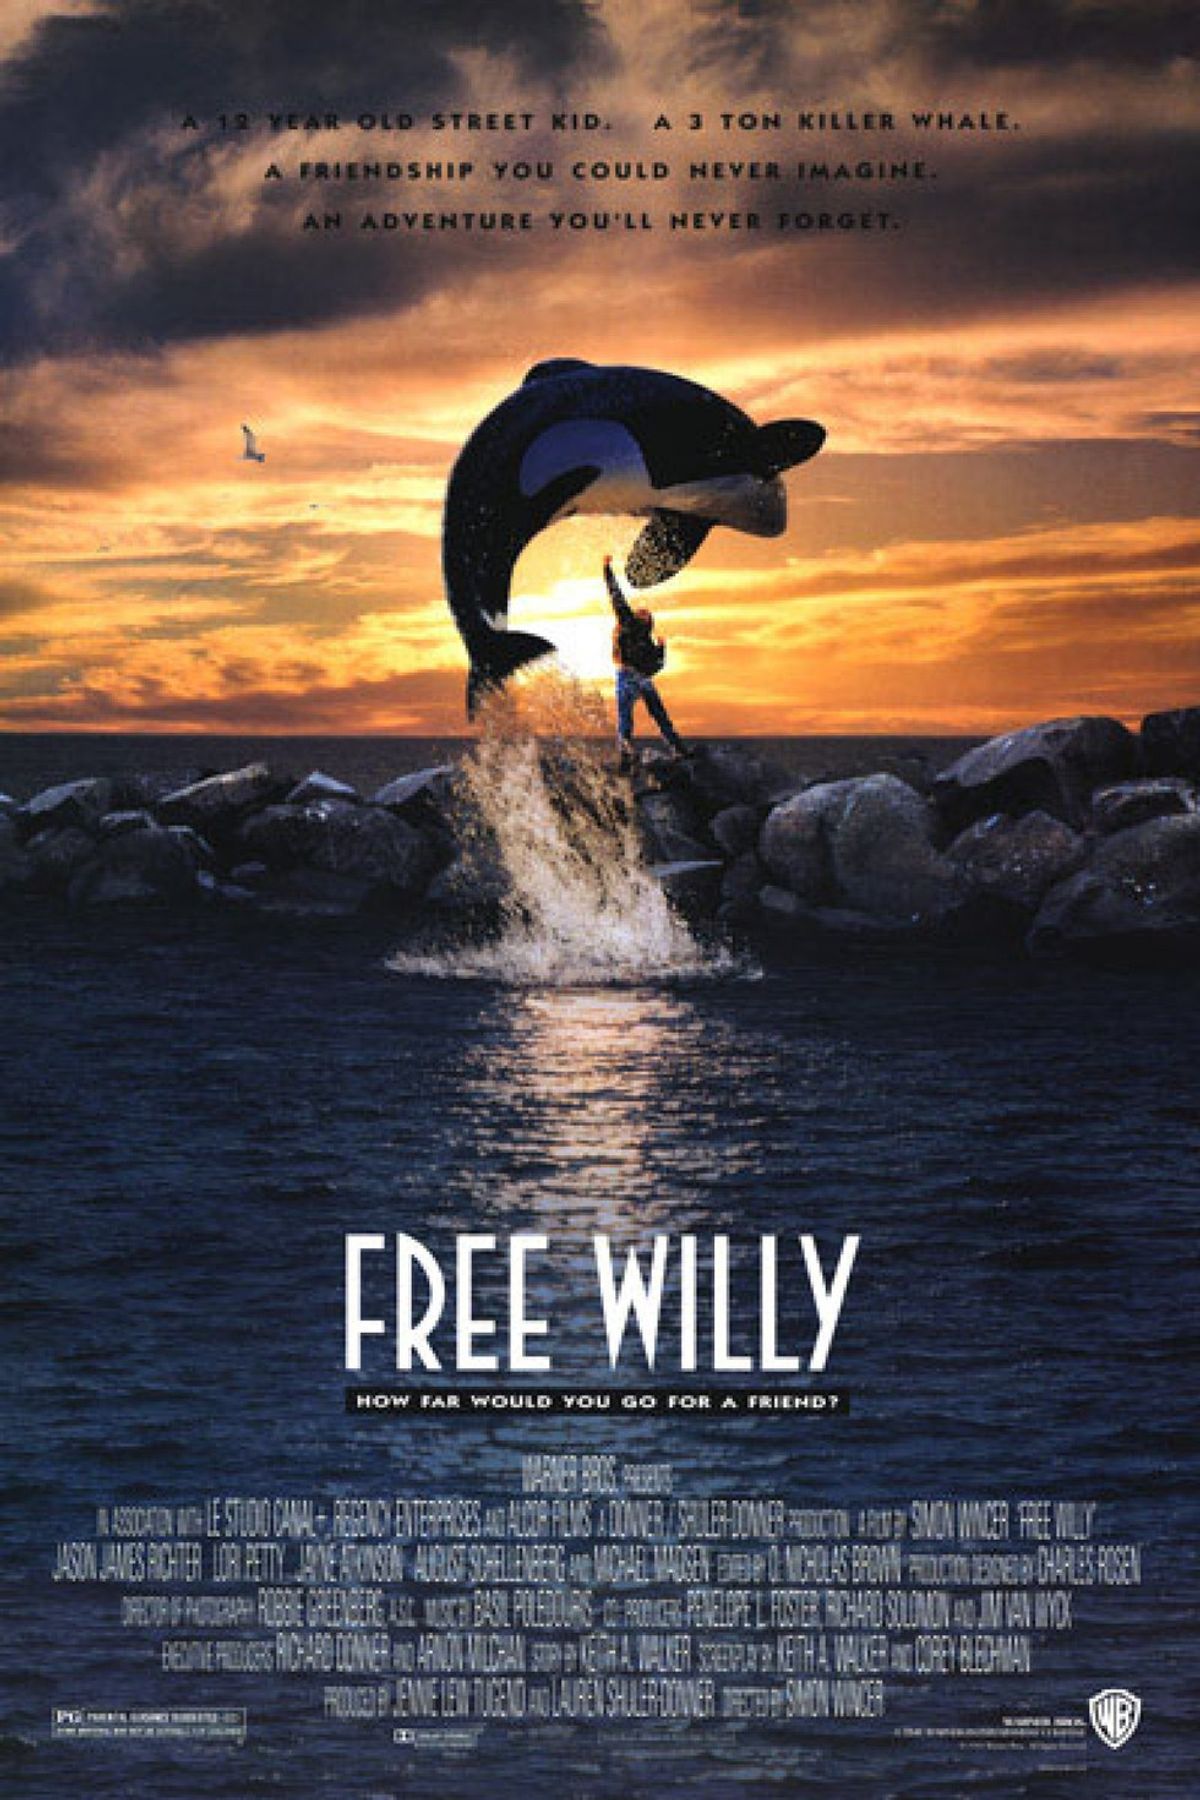 10 Thoughts I Had While Watching Free Willy As An Adult